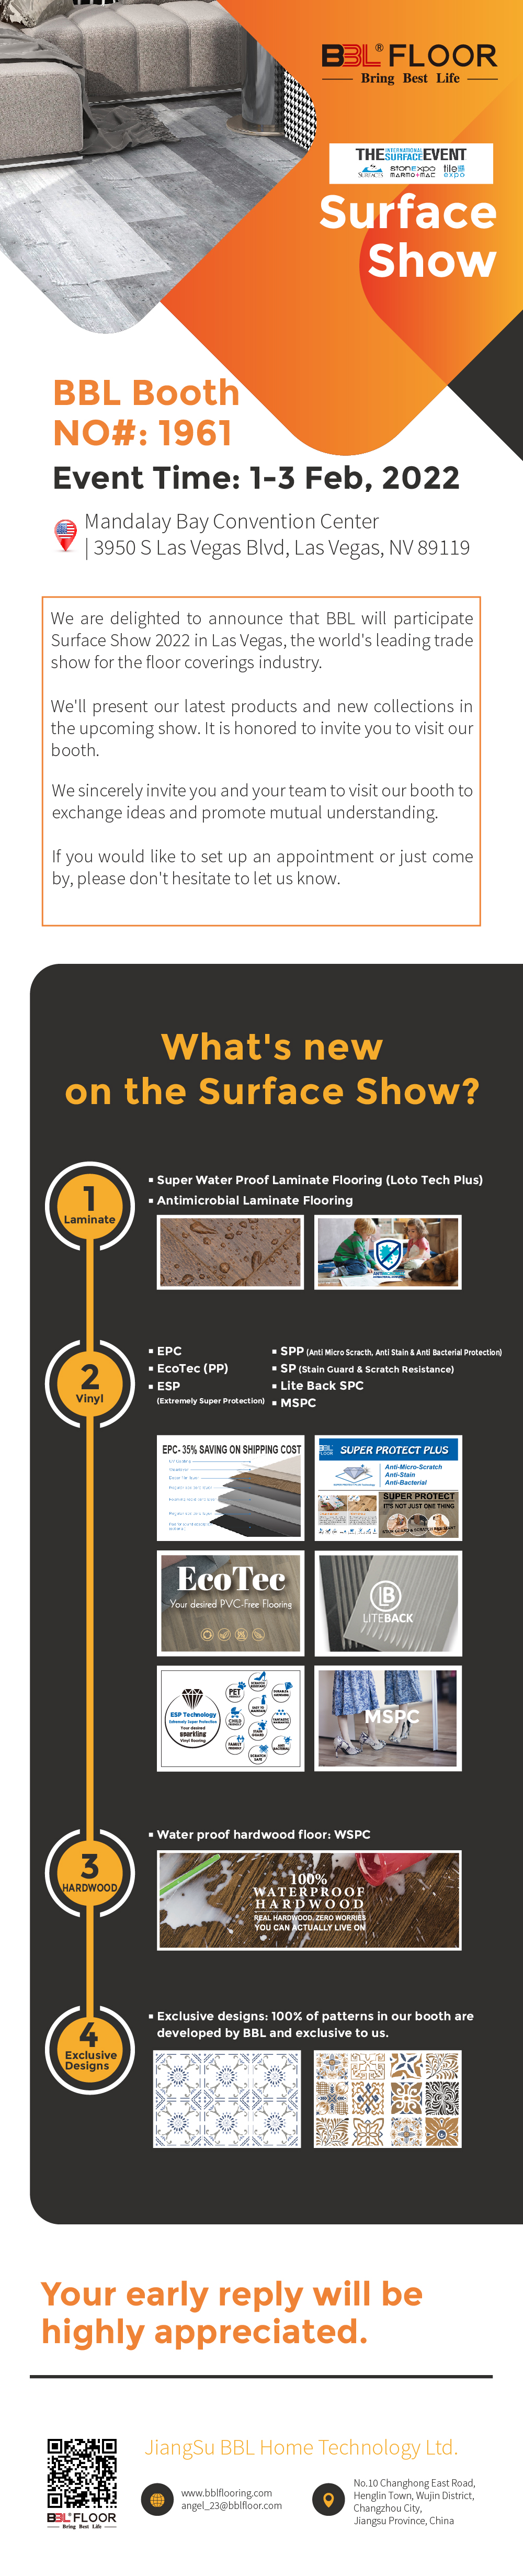 Welcome to BBL Booth NO#:1961 at the Surface Show 2022 in Las Vegas